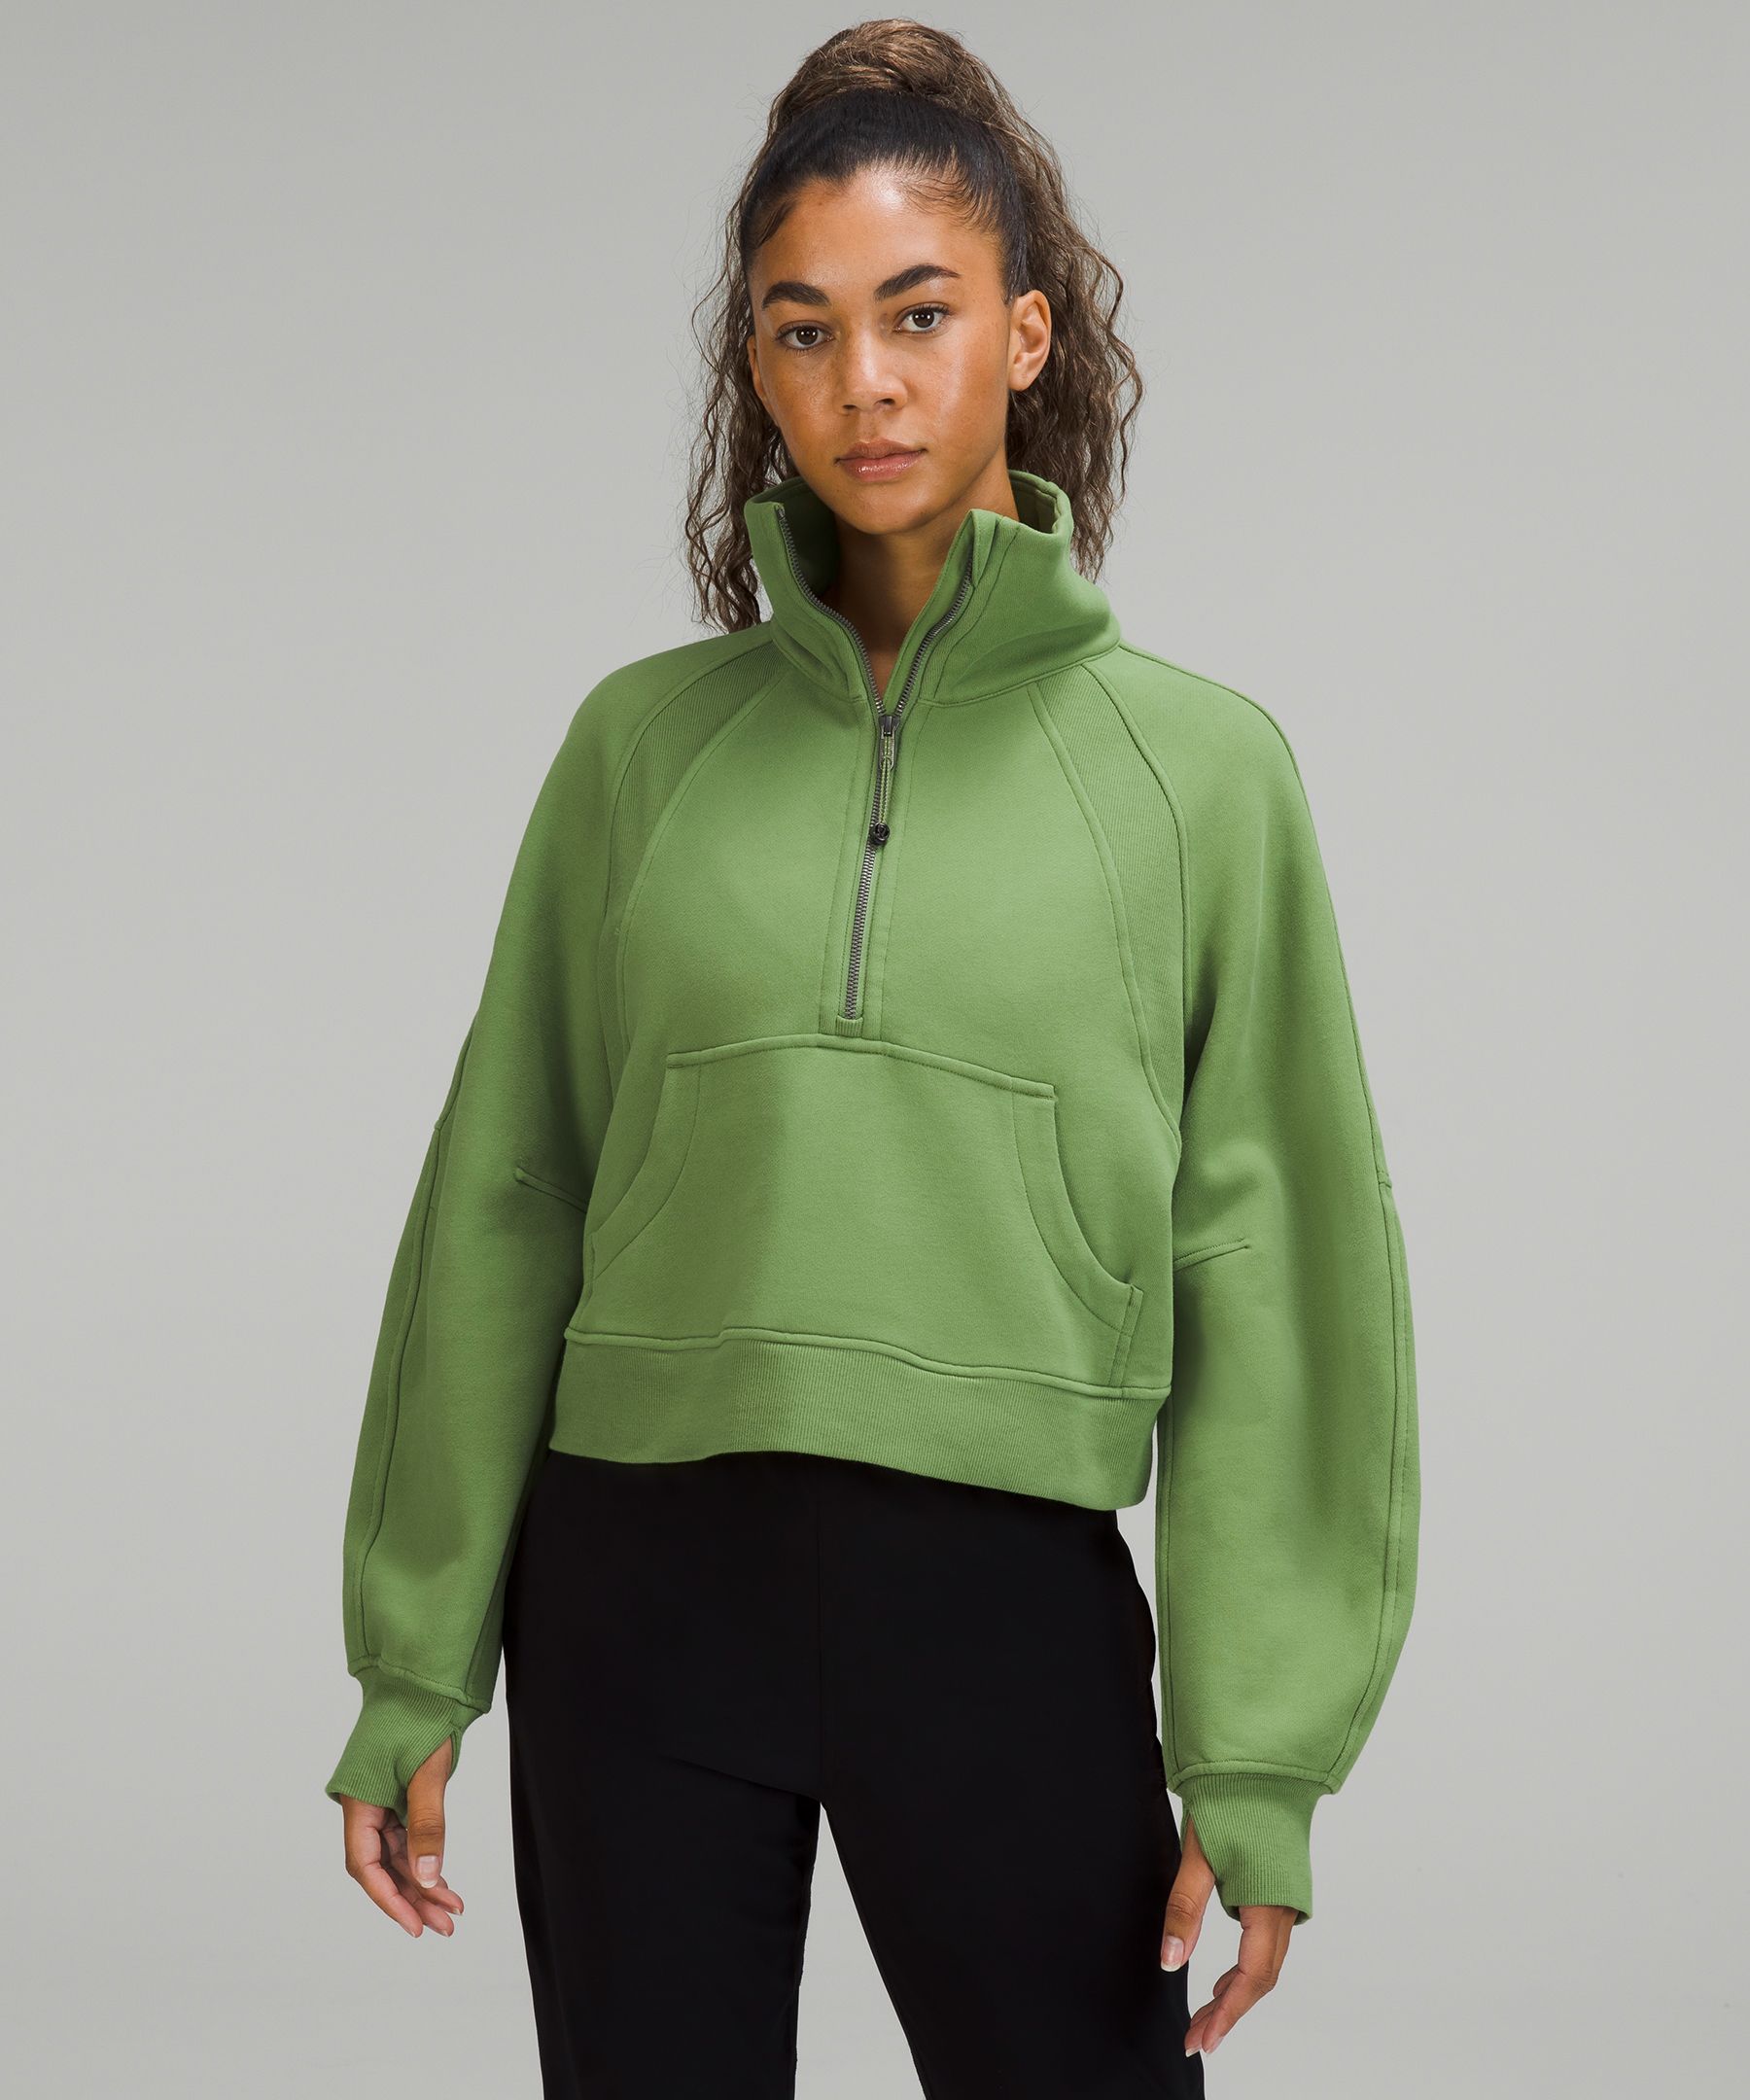 Rover is the perfect neutral - Rover Scuba Half Zip Funnel Neck